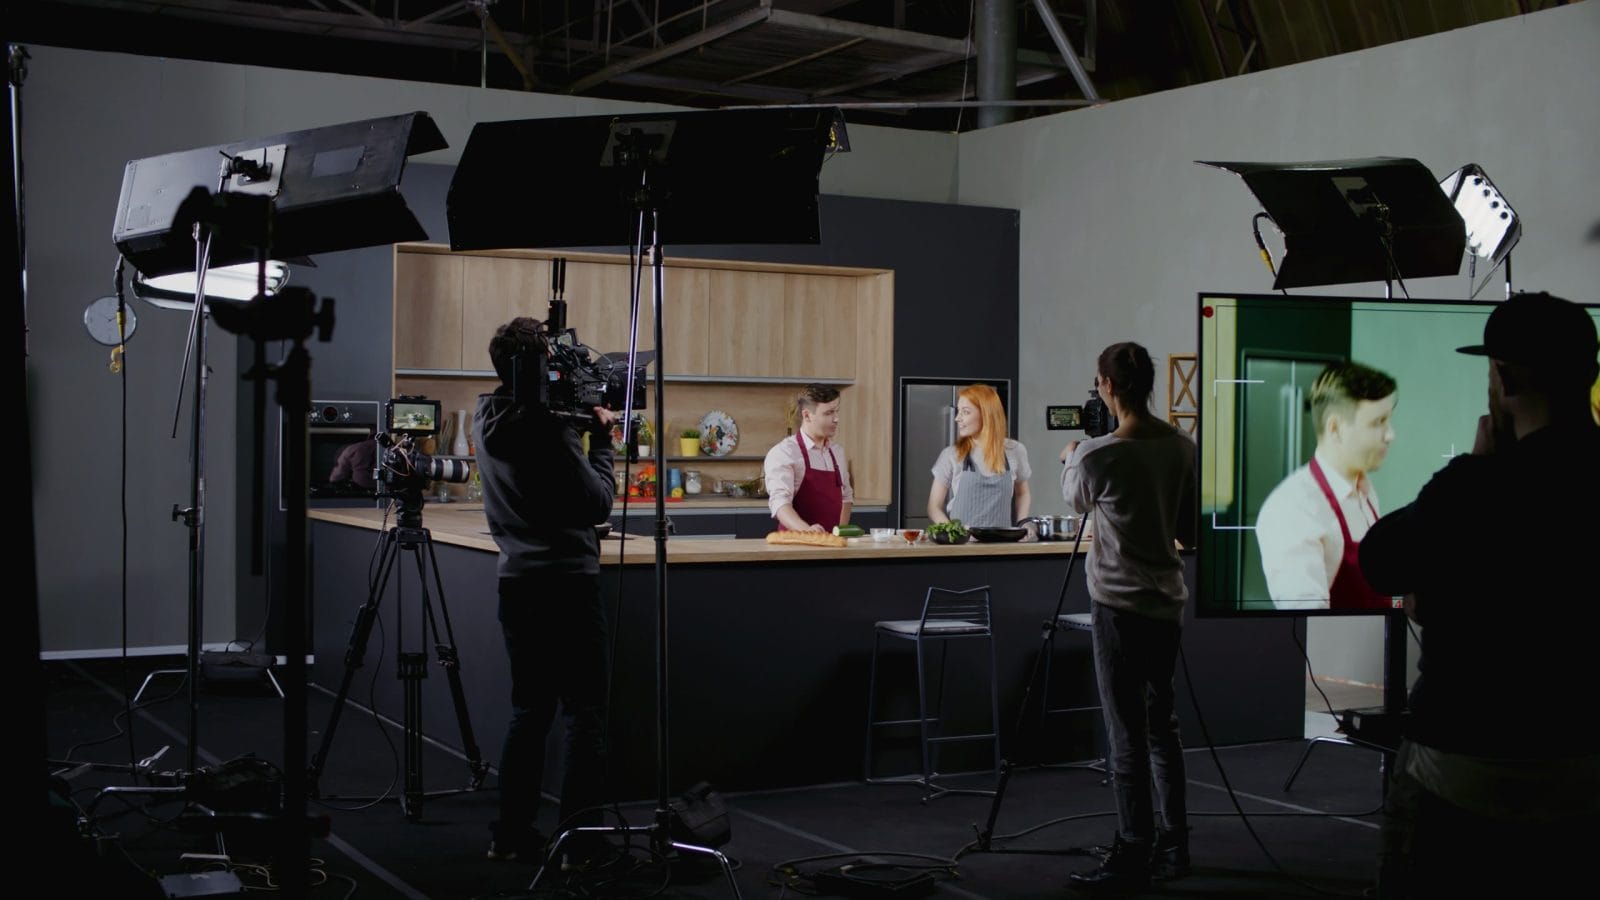 Behind the scenes of a cooking show